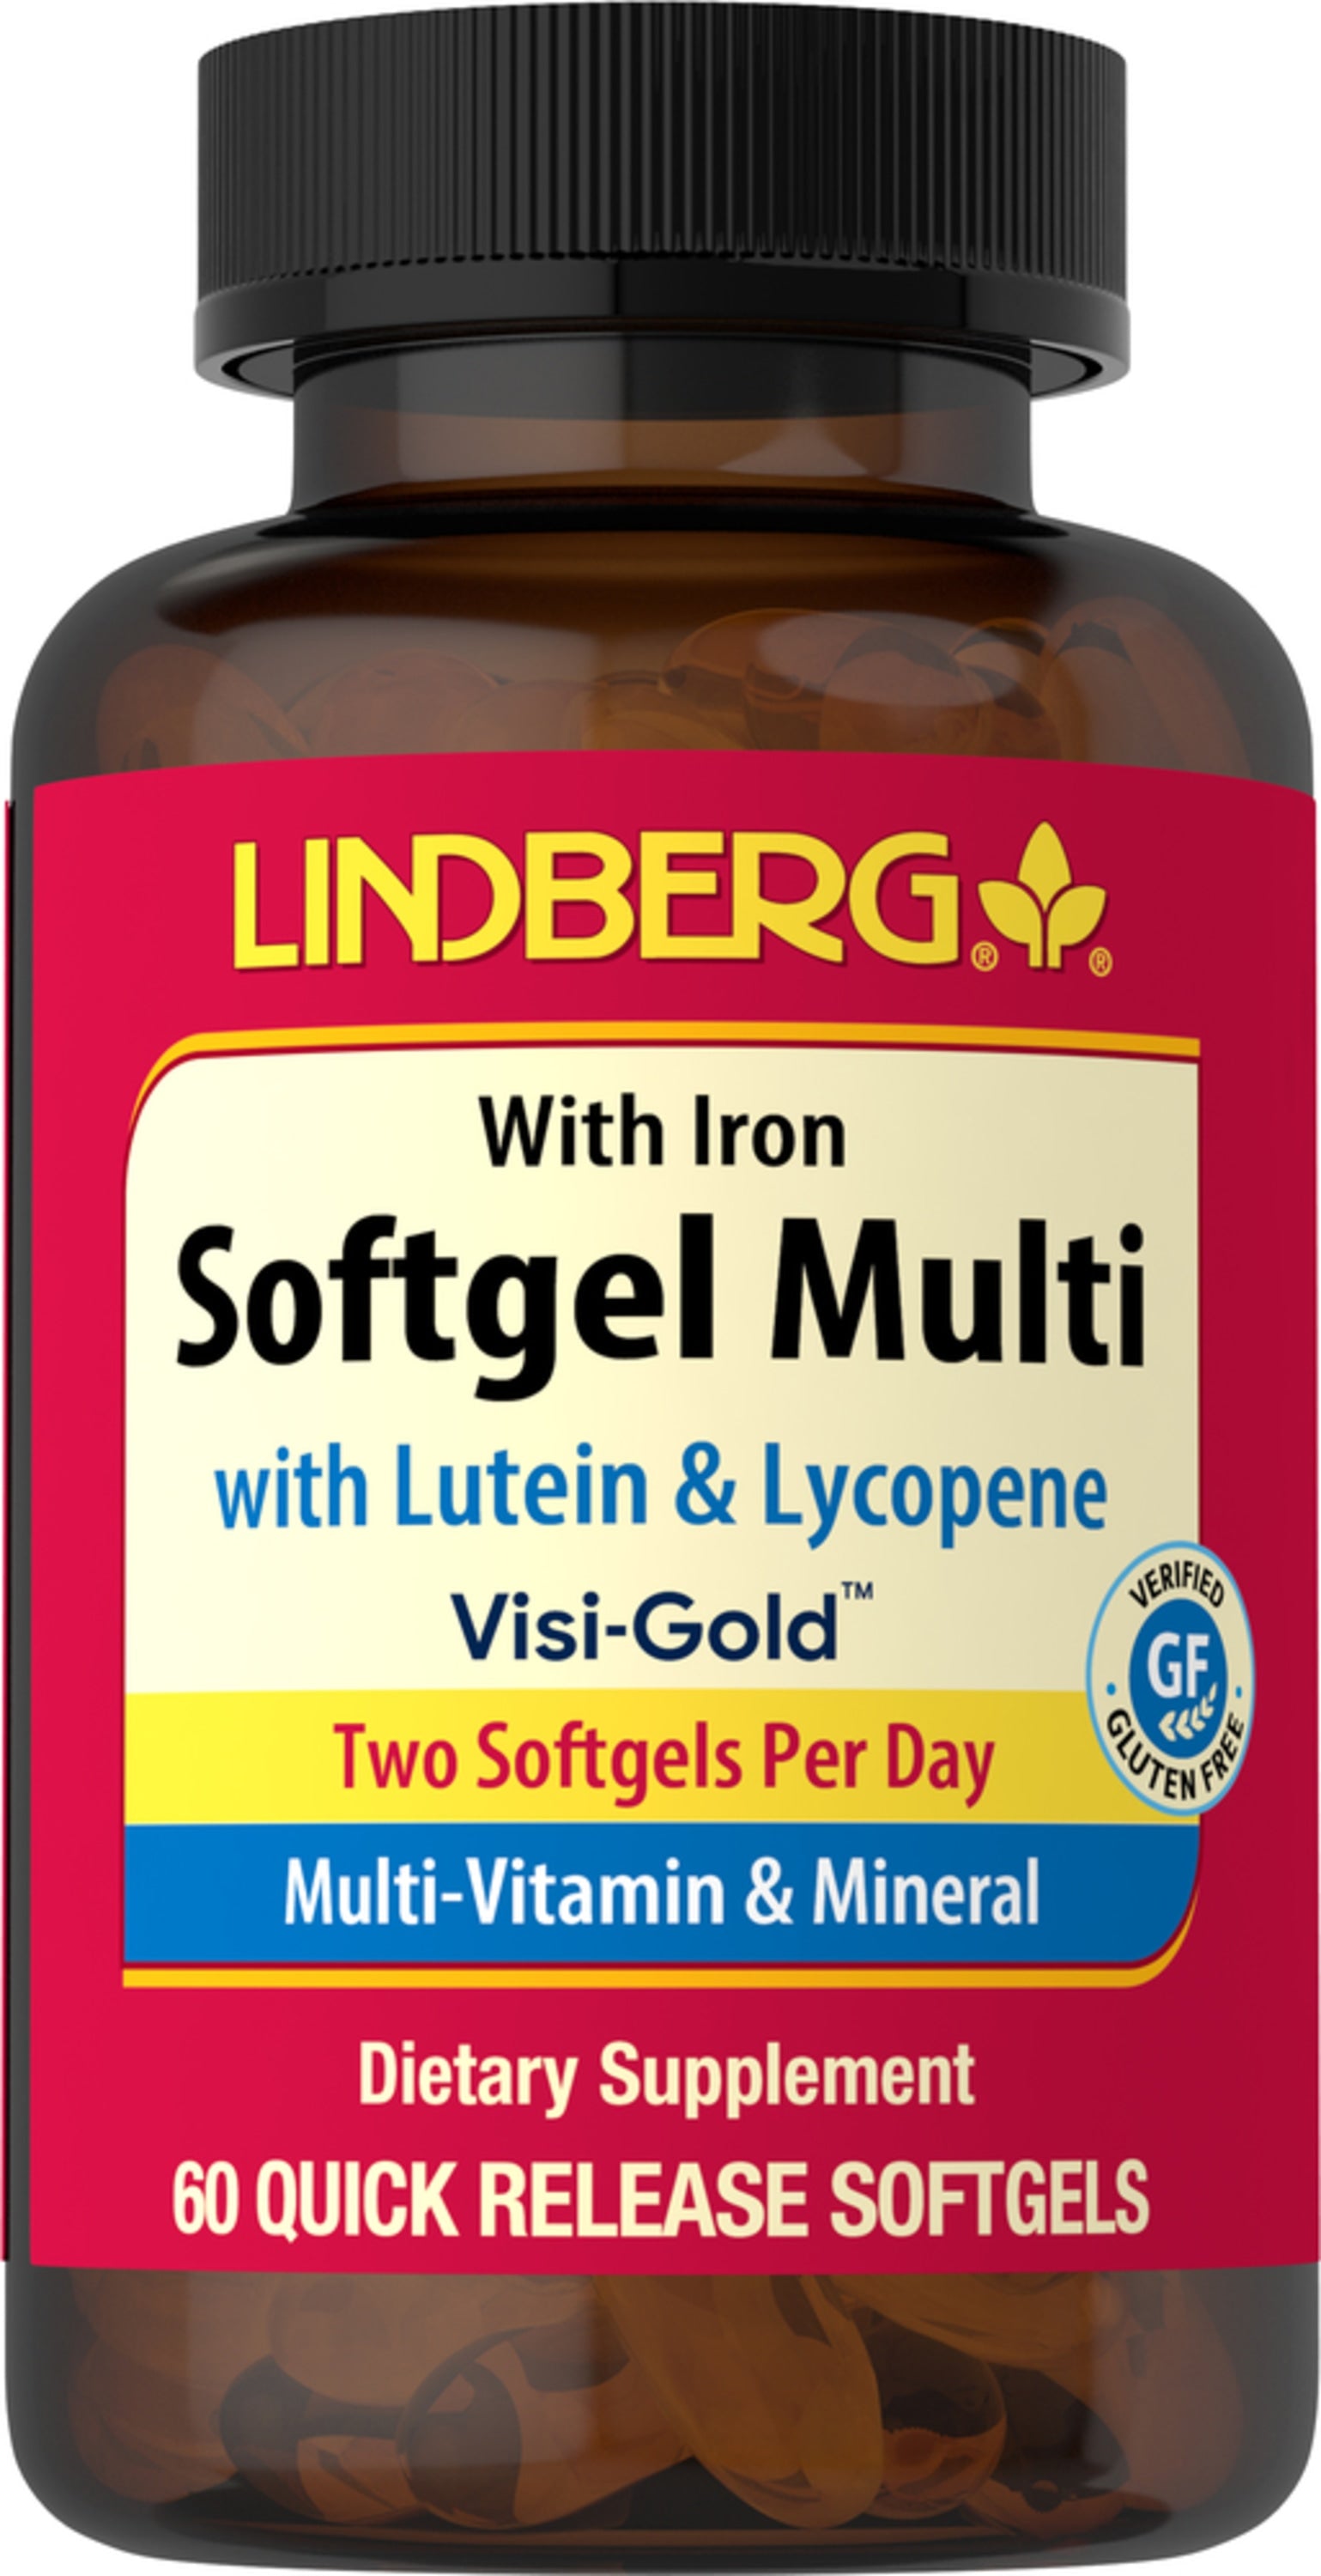 Softgel Multi with Lutein & Lycopene, 60 Quick Release Softgels